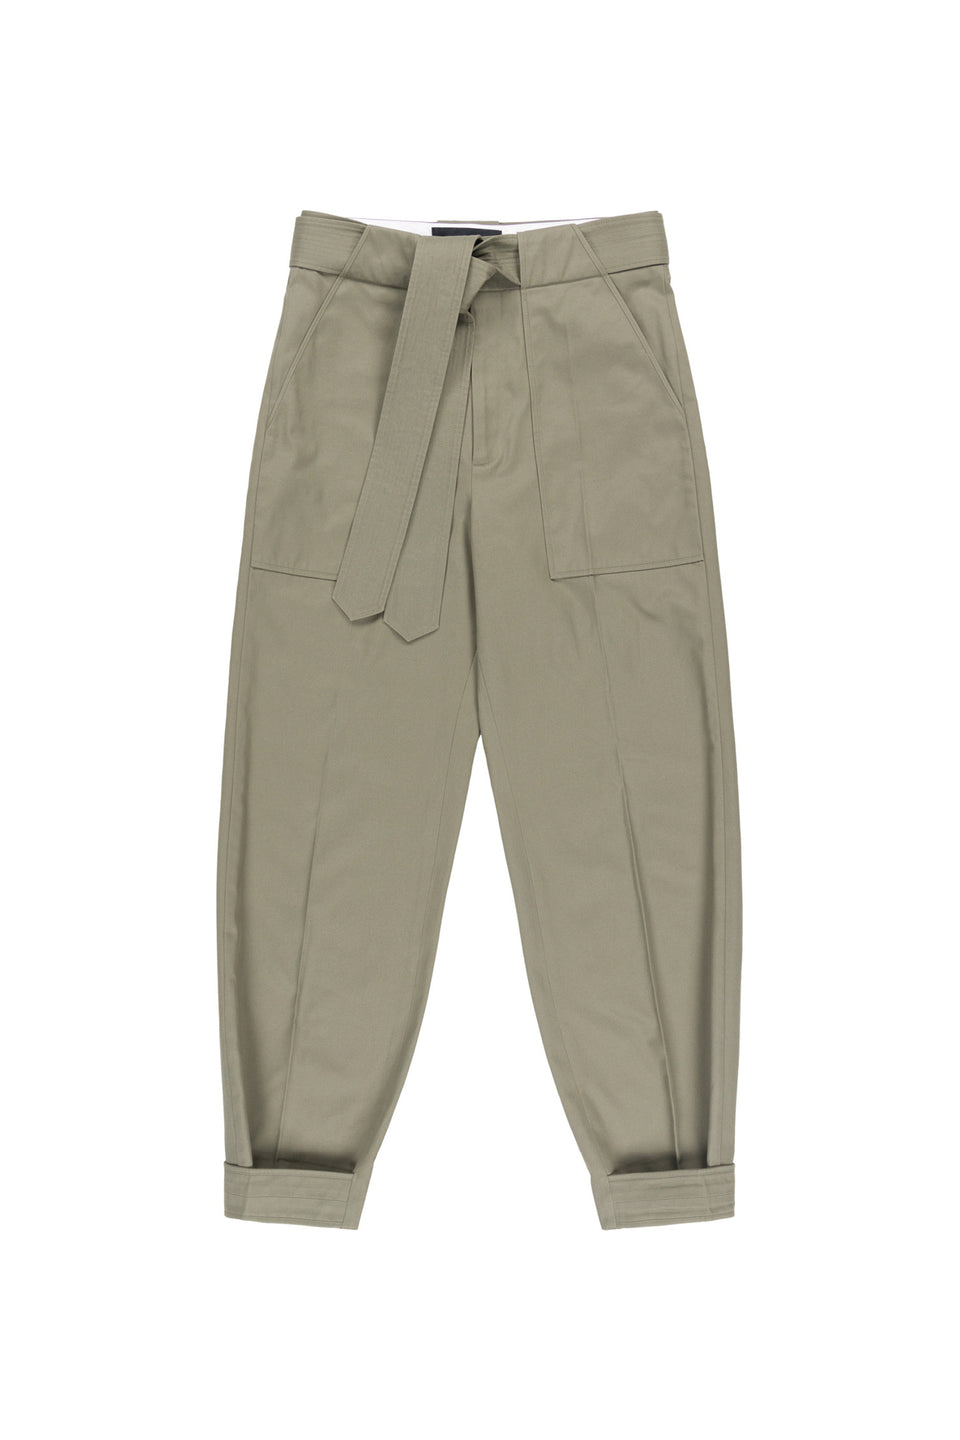 Utility Tapered Trouser - Olive Green (listing page thumbnail)